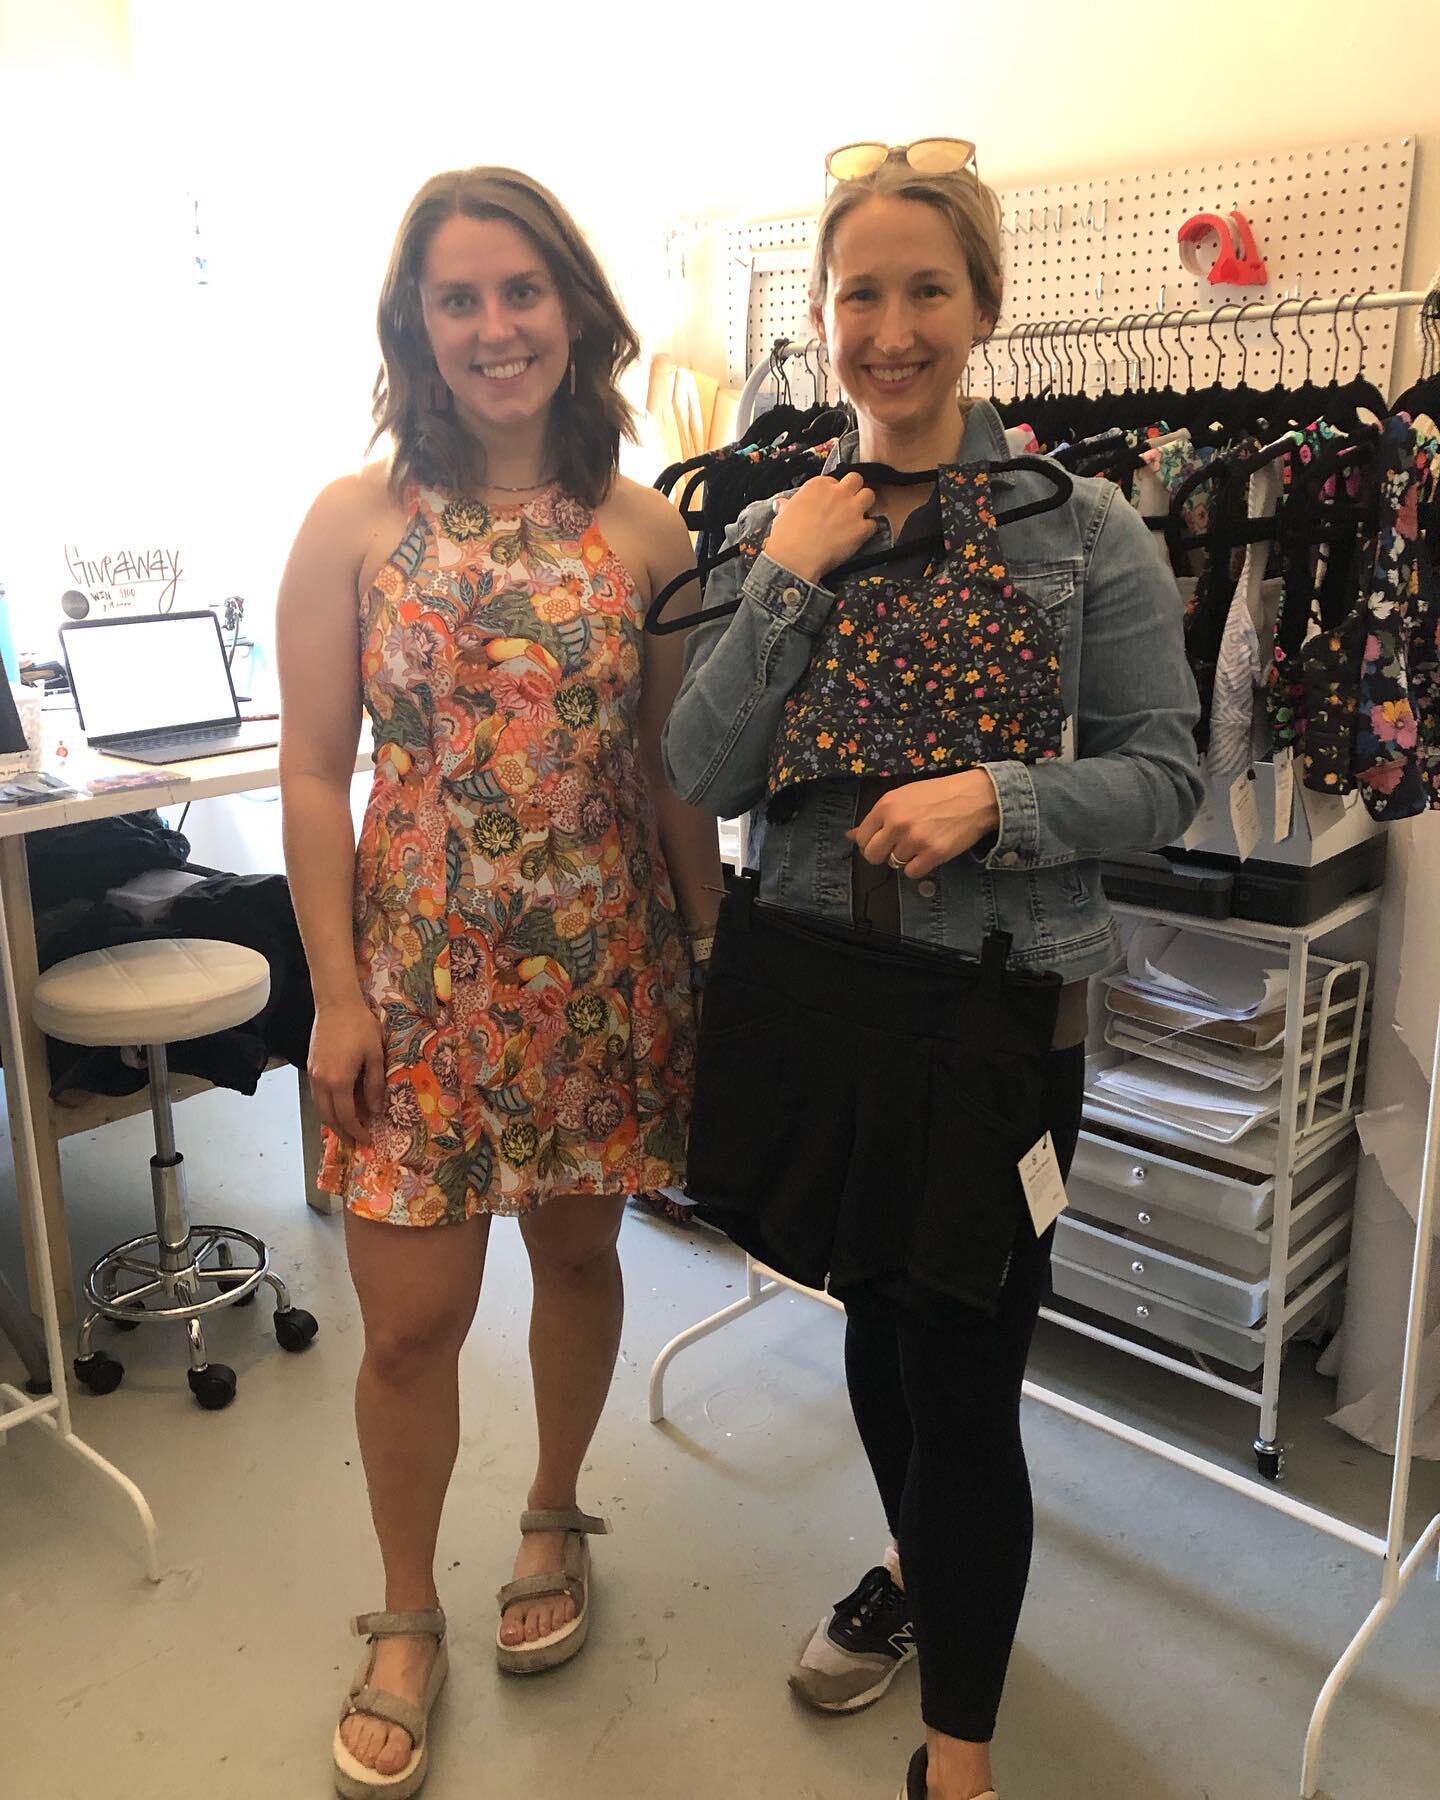 Visiting and shopping with Abby @induraathletic  Check out her women&rsquo;s athletic clothing! Great designs, made for athletic bodies, and fun fabrics! See you @northeast.fitness Featured in @outsidemagazine  Available in local running and ski shop